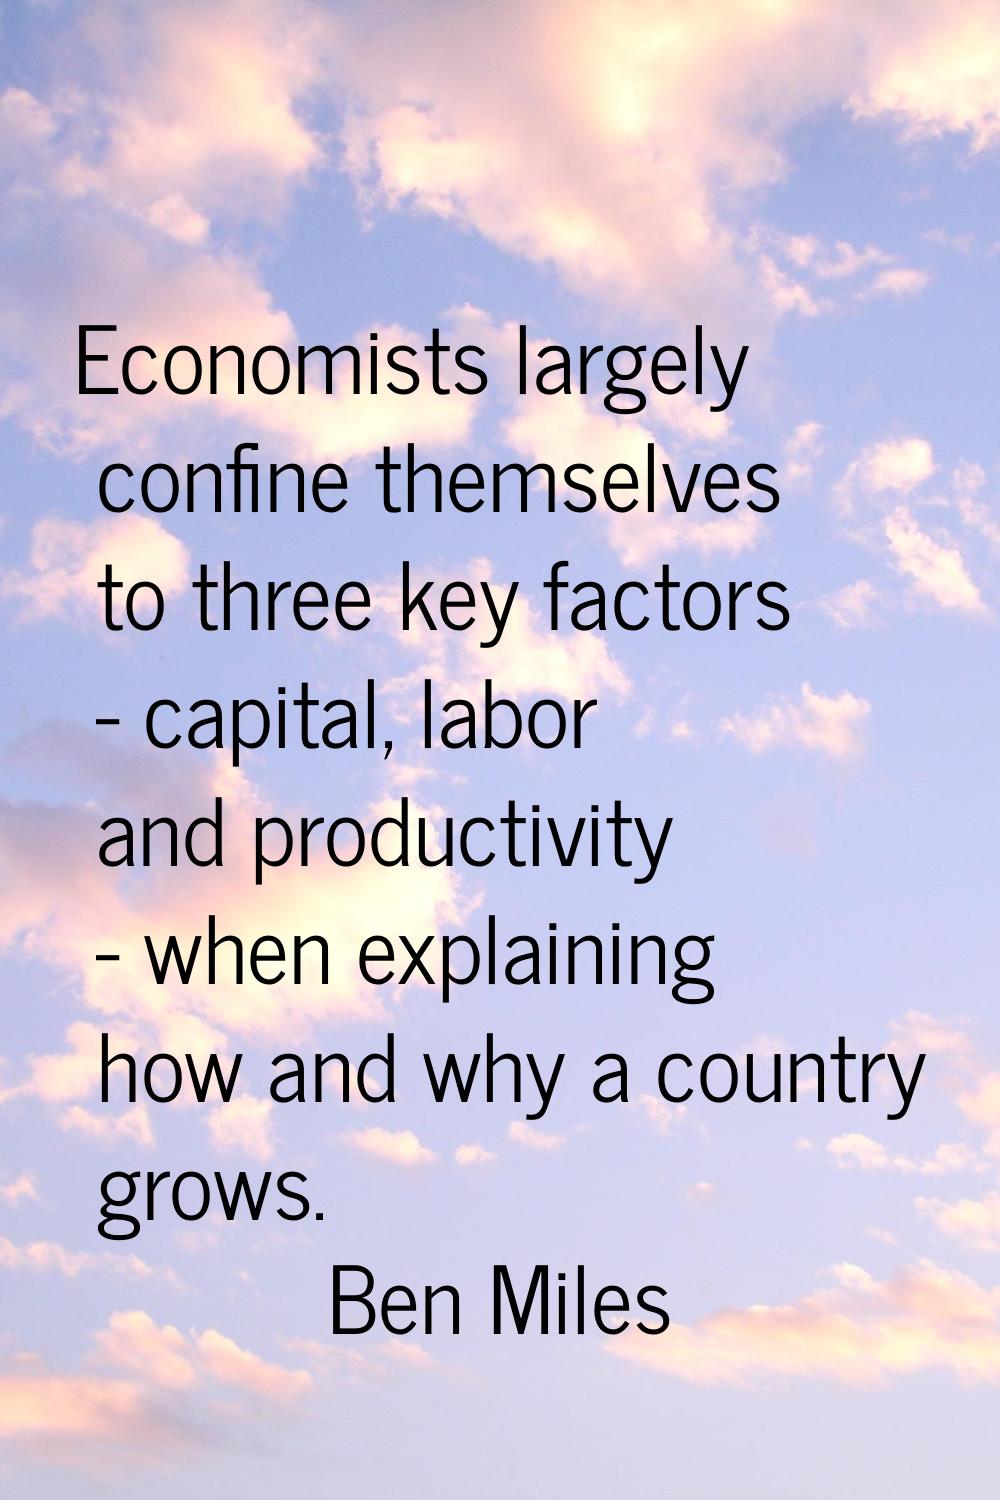 Economists largely confine themselves to three key factors - capital, labor and productivity - when